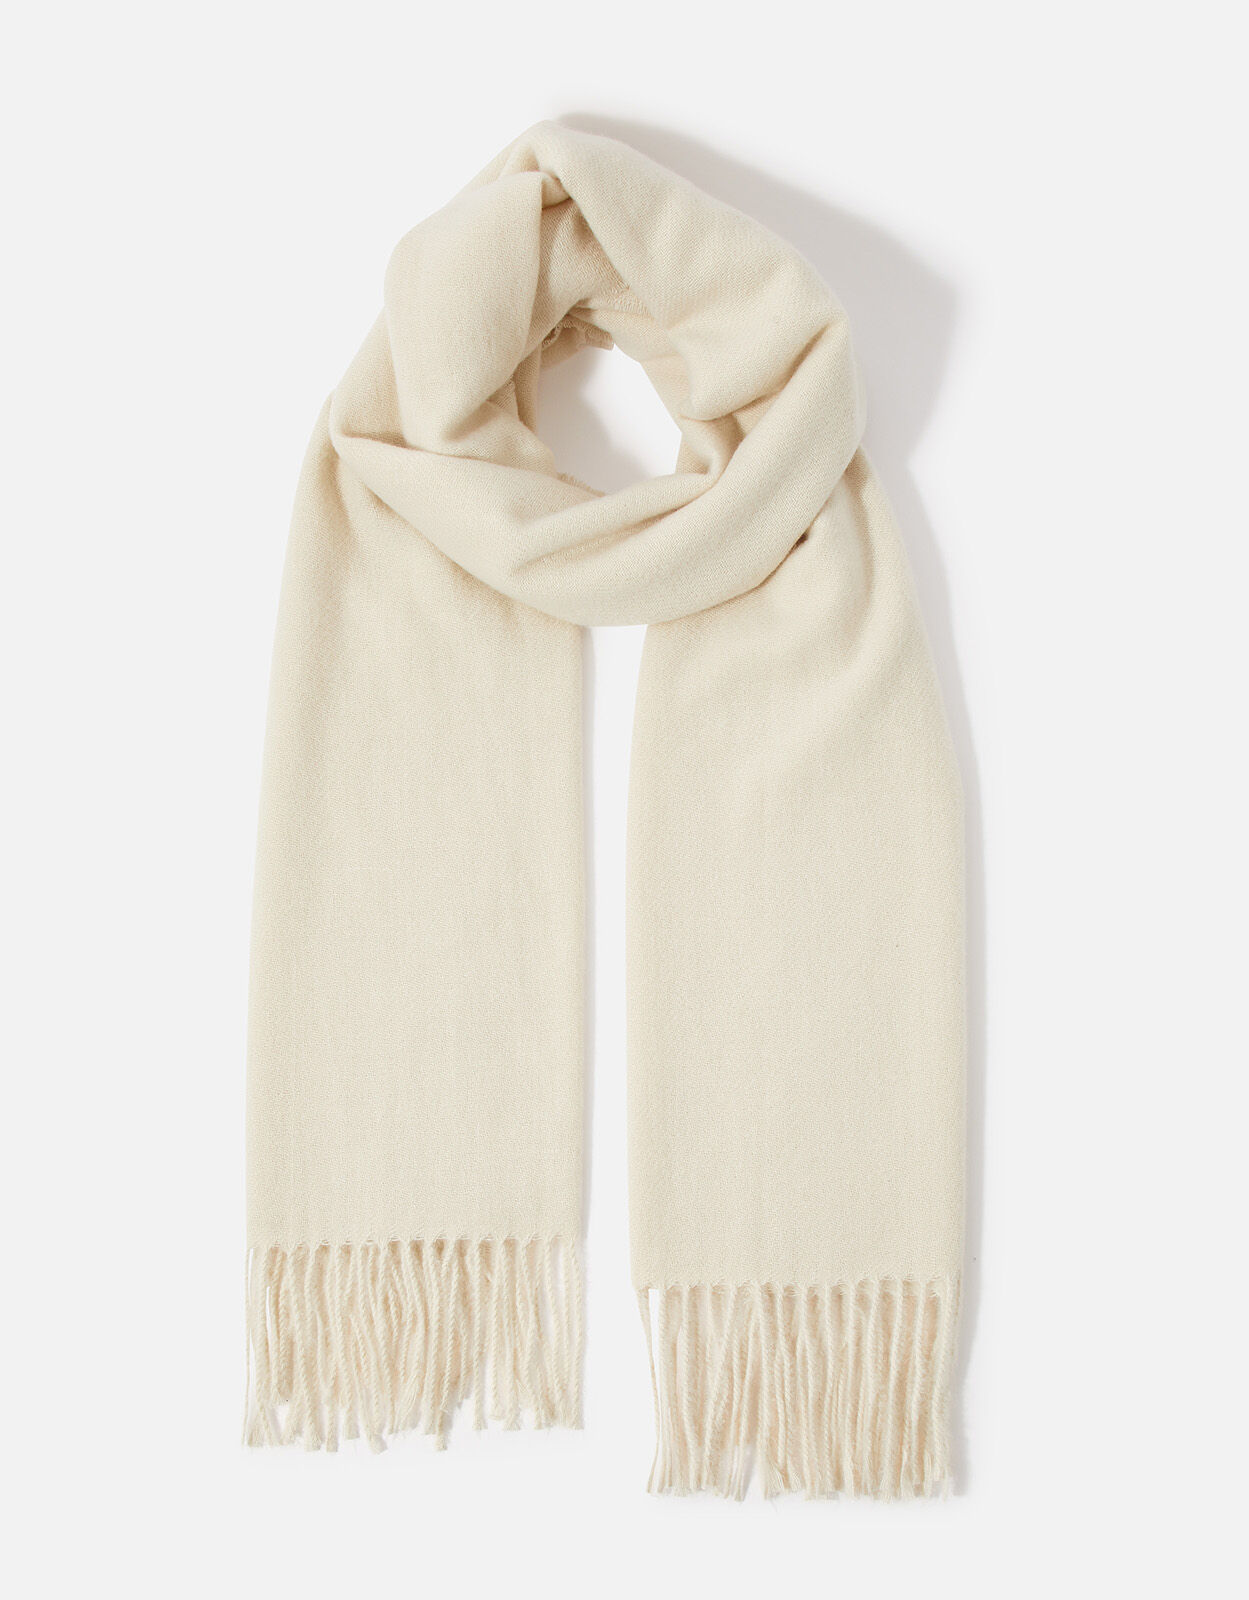 Natural Womens Accessories Scarves and mufflers Drumohr Cashmere Blanket Or Cover in Camel 